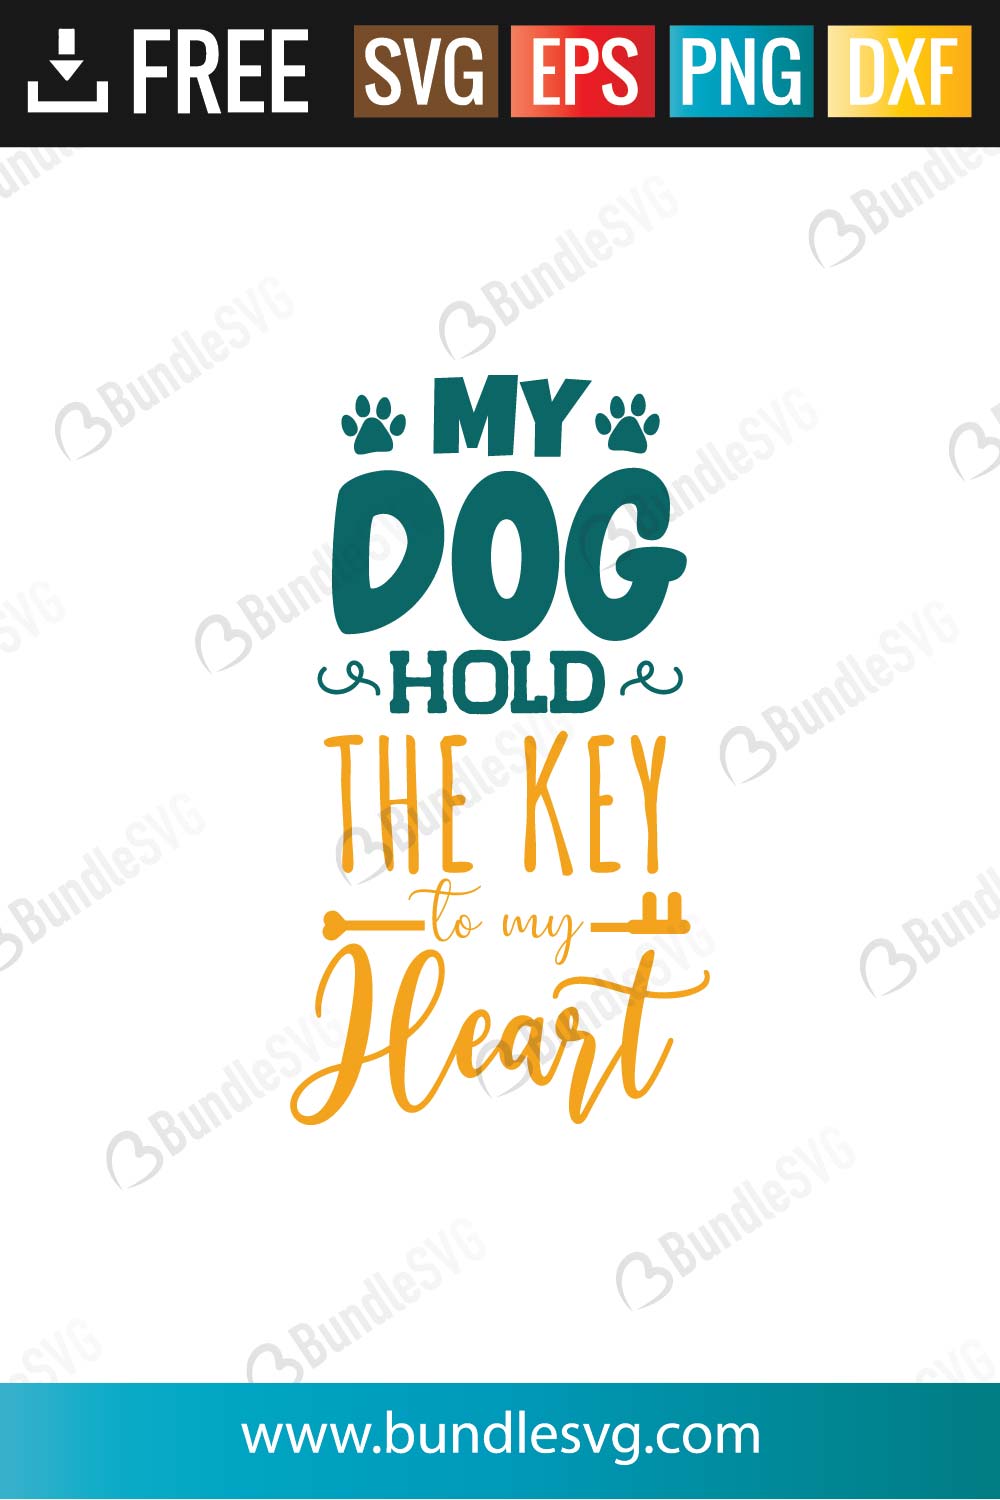 Download My Dog Hold The Key To My Heart Svg Cut Files Bundlesvg